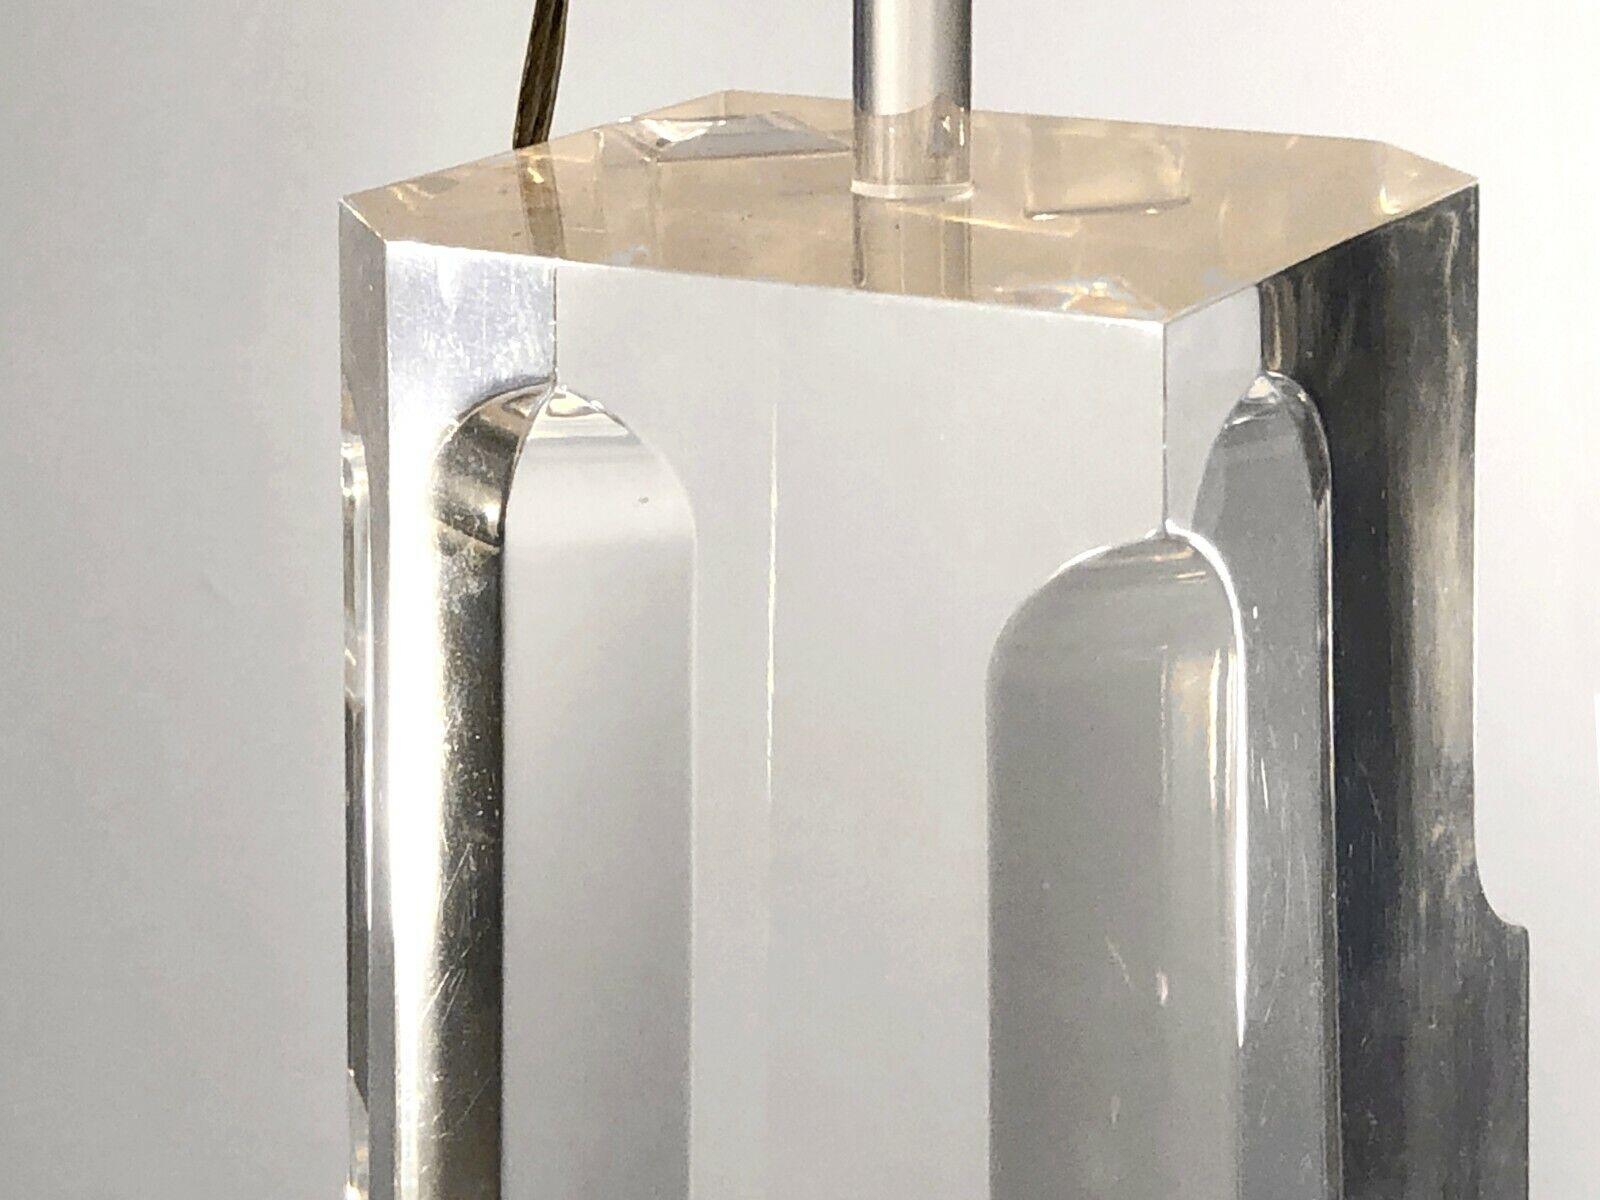 Post-Modern A Sculptural POST-MODERN LUCITE TABLE LAMP by ALESSIO TASCA, FUSINA, Italy 1970 For Sale